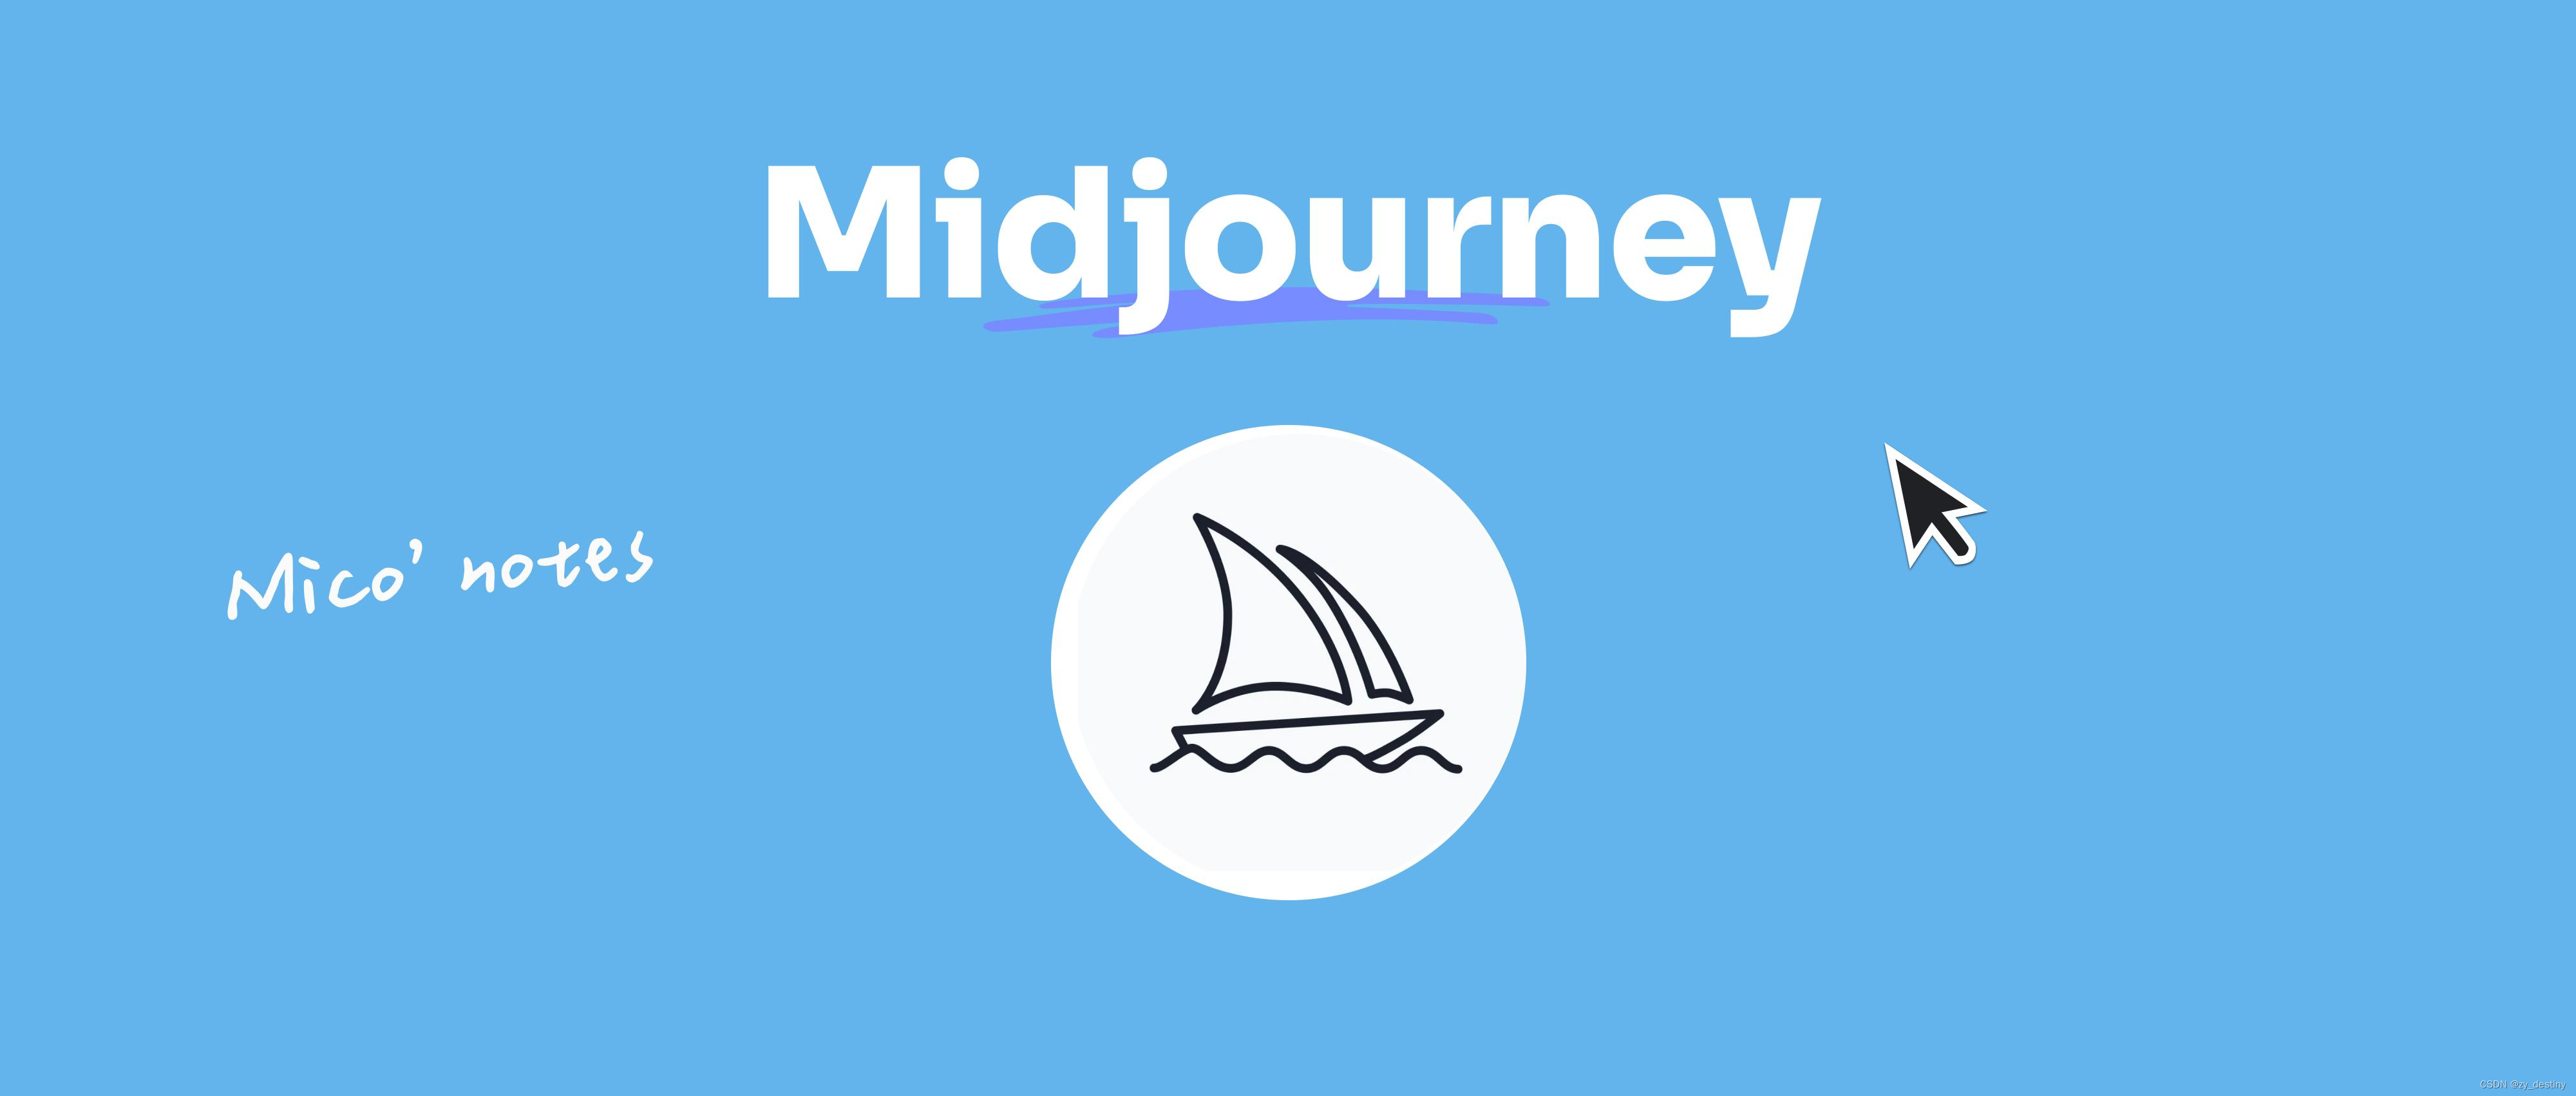 【<span style='color:red;'>Midjourney</span>】<span style='color:red;'>Midjourney</span>根据<span style='color:red;'>prompt</span><span style='color:red;'>提示</span><span style='color:red;'>词</span>生成黑白色图片